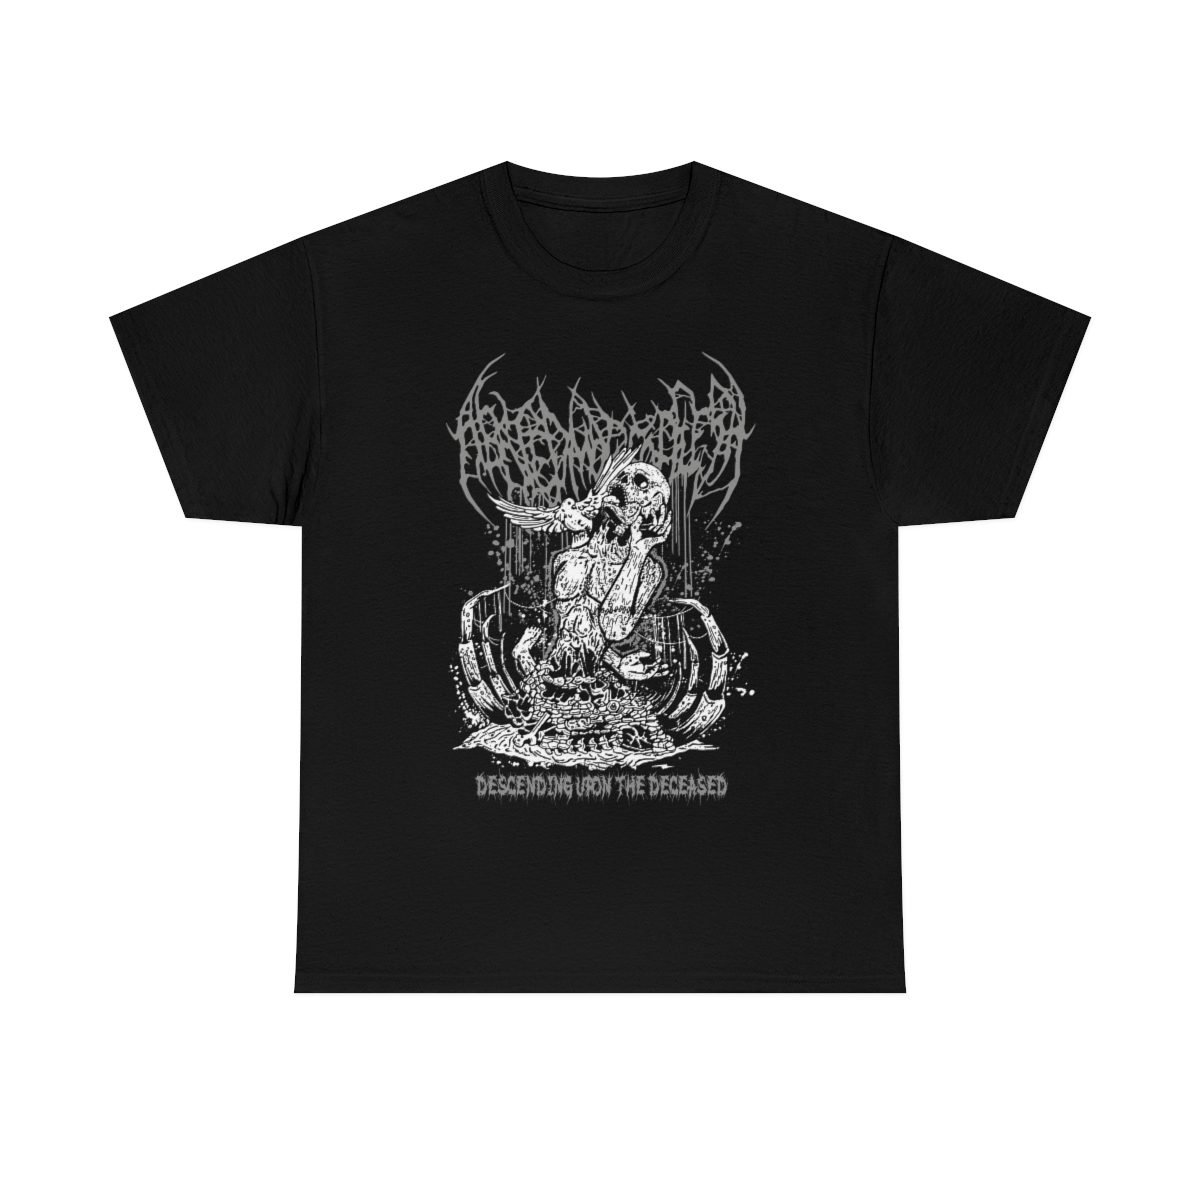 Abated Mass of Flesh – Descending Upon The Deceased (The Charon Collective) Short Sleeve Tshirt (5000)